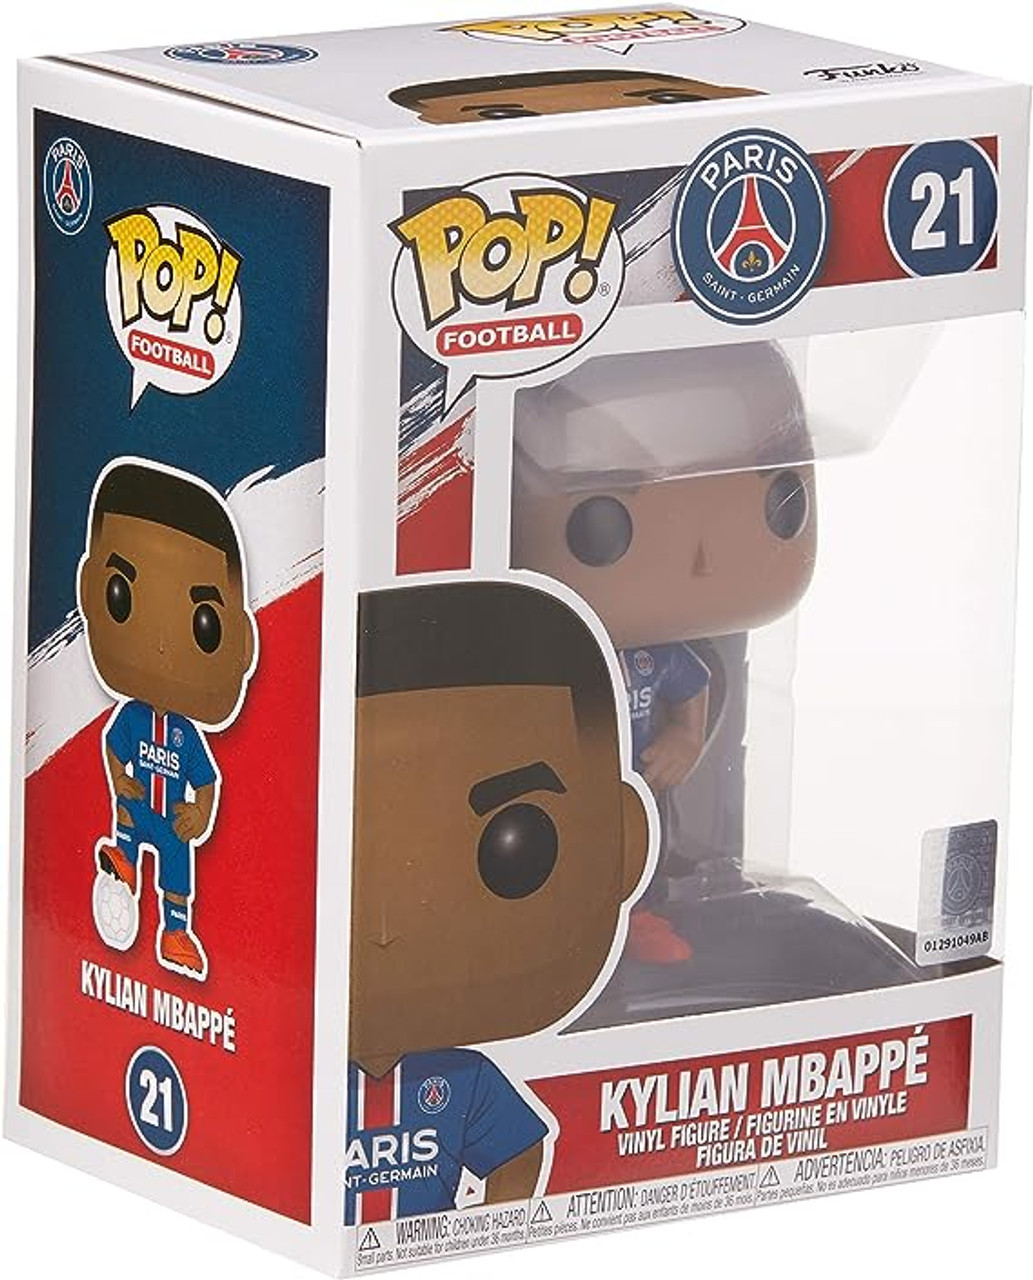 Two new POP! figurines by Mbappé